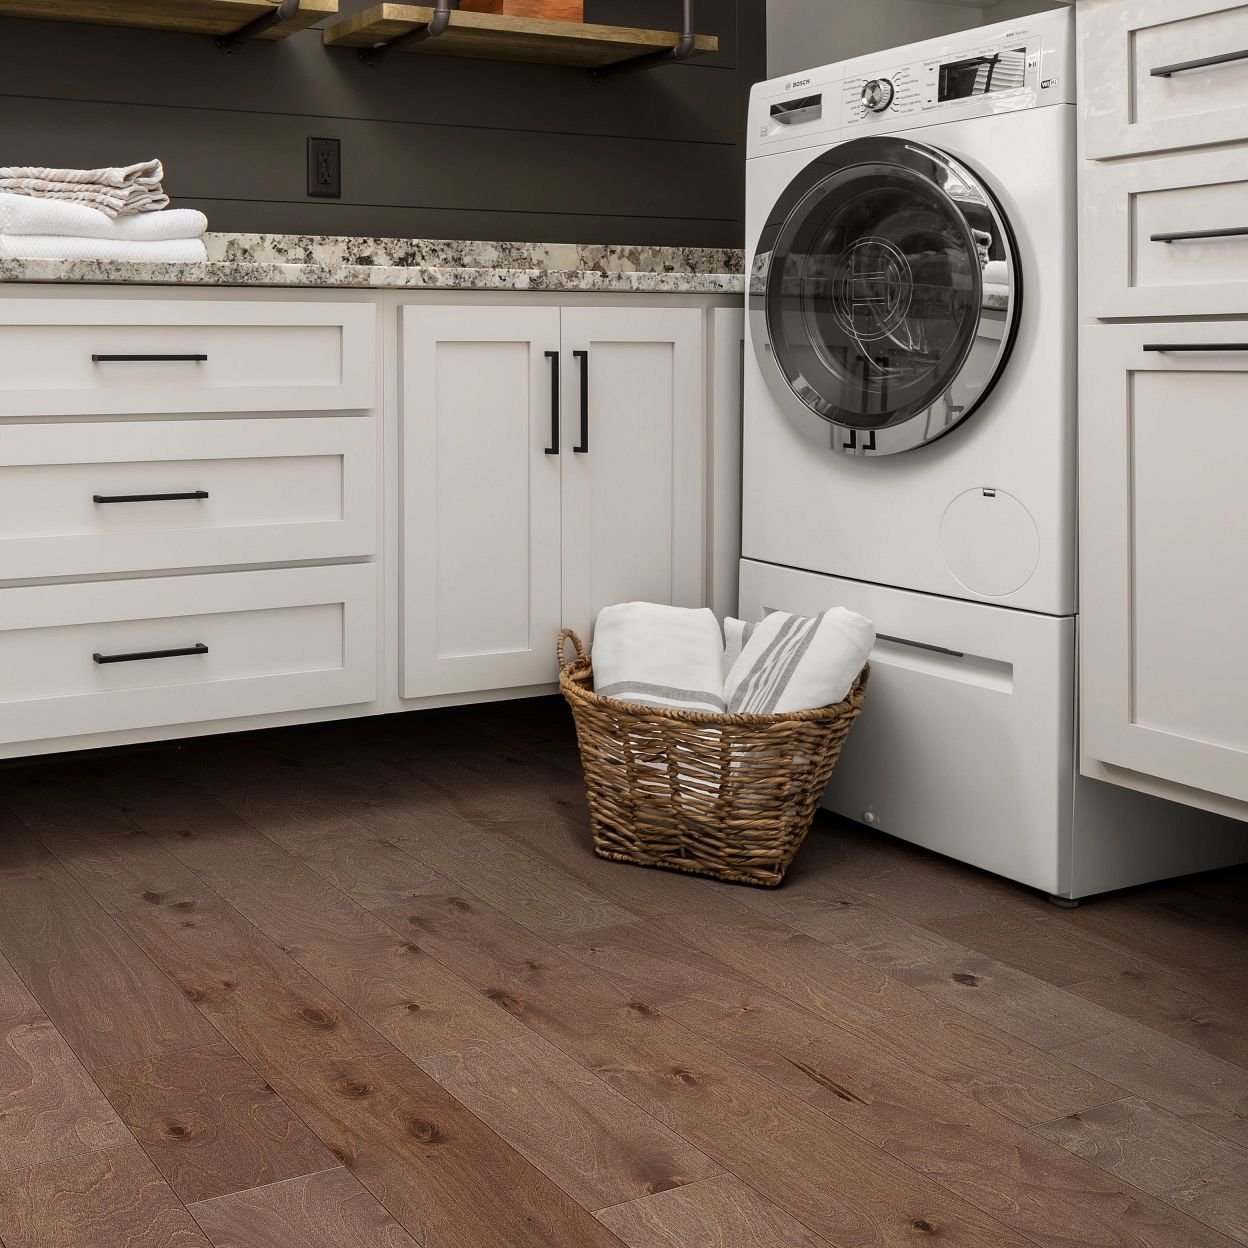 Laundry room from Carpet Mill Discounters Inc in Timonium